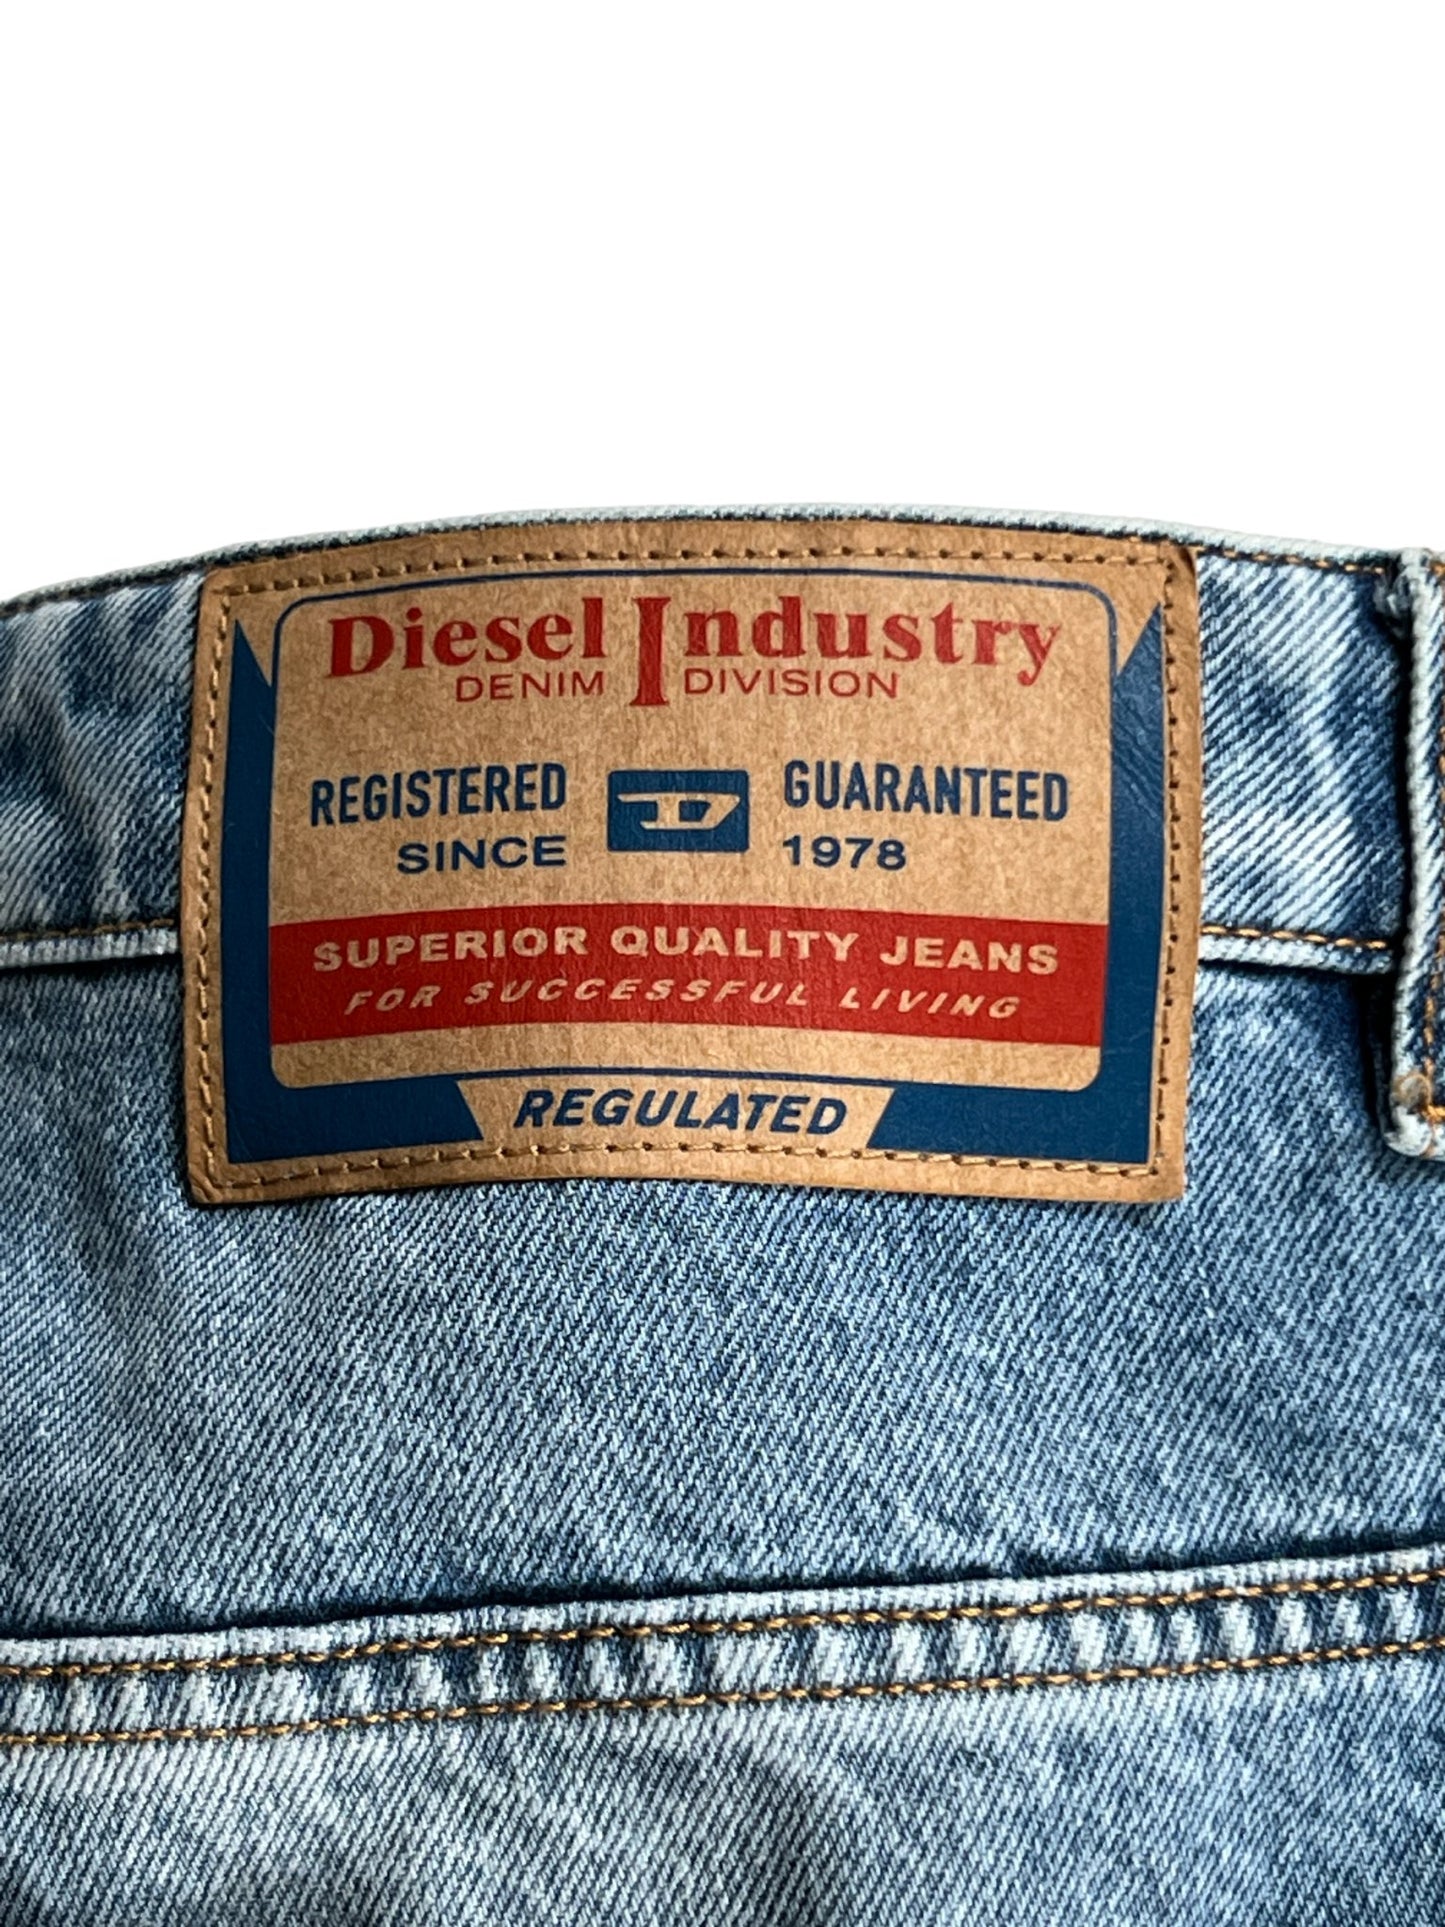 Close-up of a DIESEL D-P-5-D-S JEANS GHAW label showing brand and quality guarantee details.